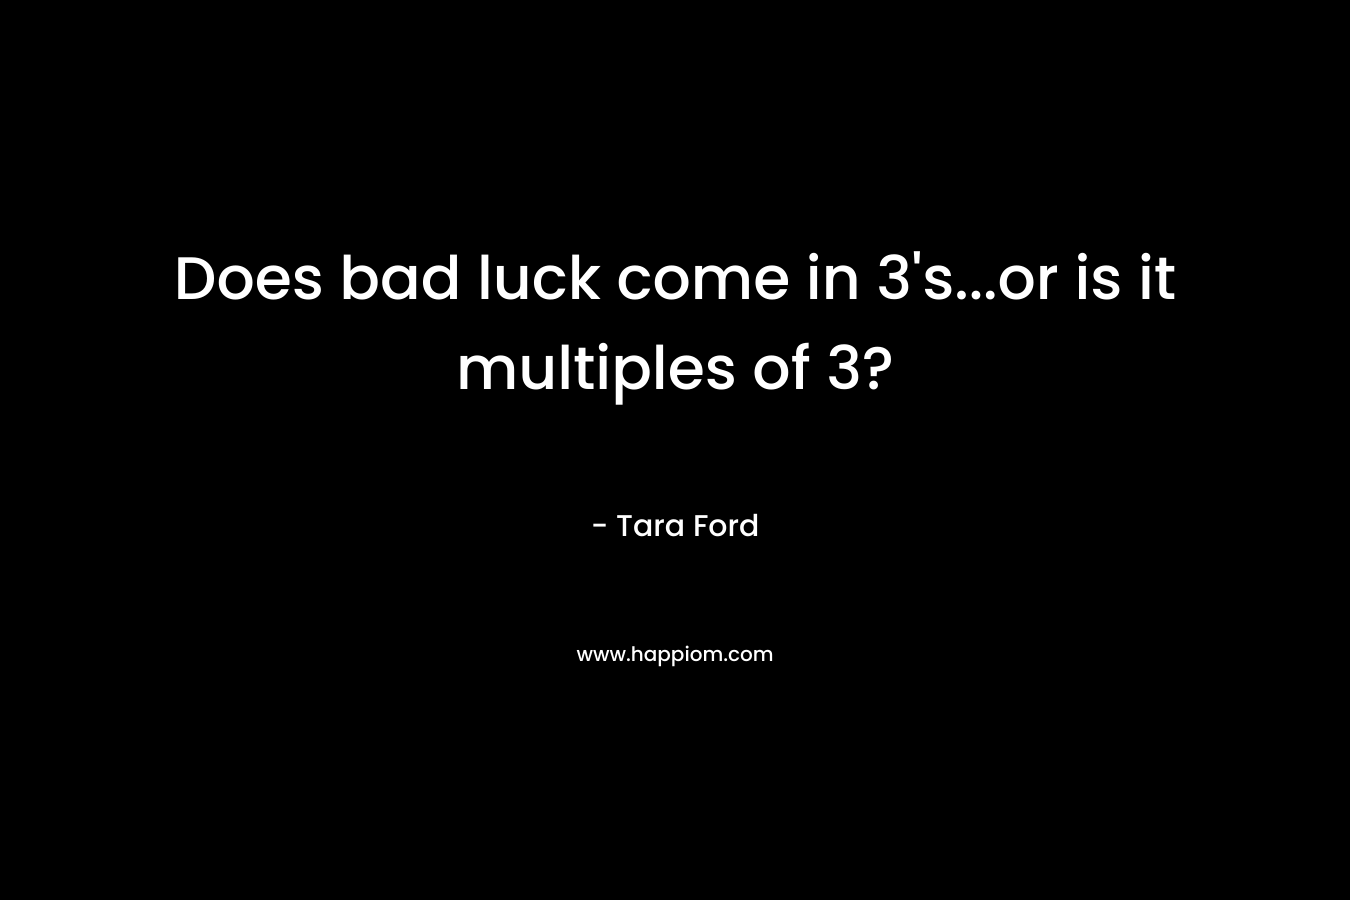 Does bad luck come in 3's...or is it multiples of 3?